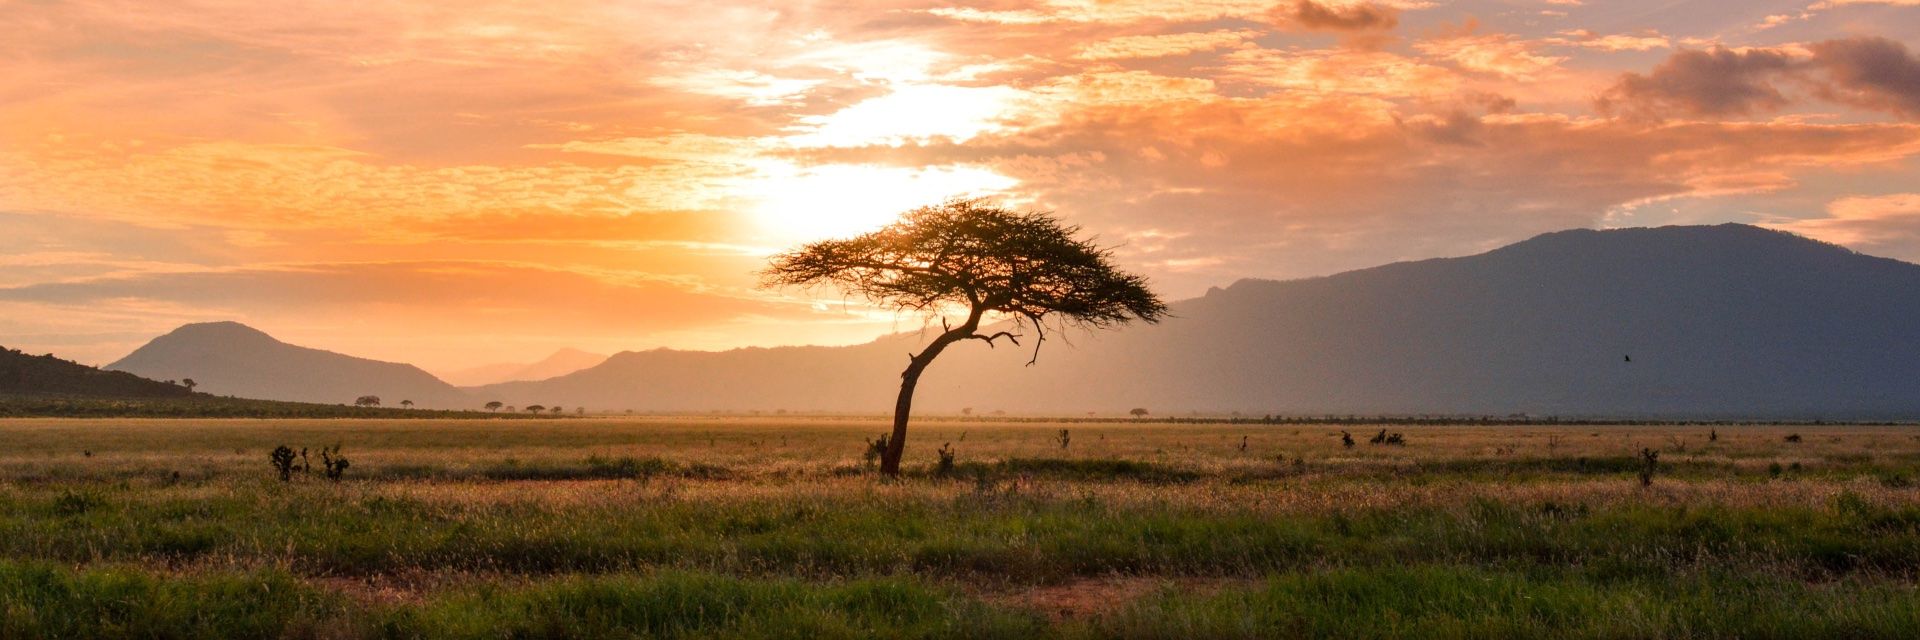 A photo of a lone tree in the middle of a grassy plain in Kenya